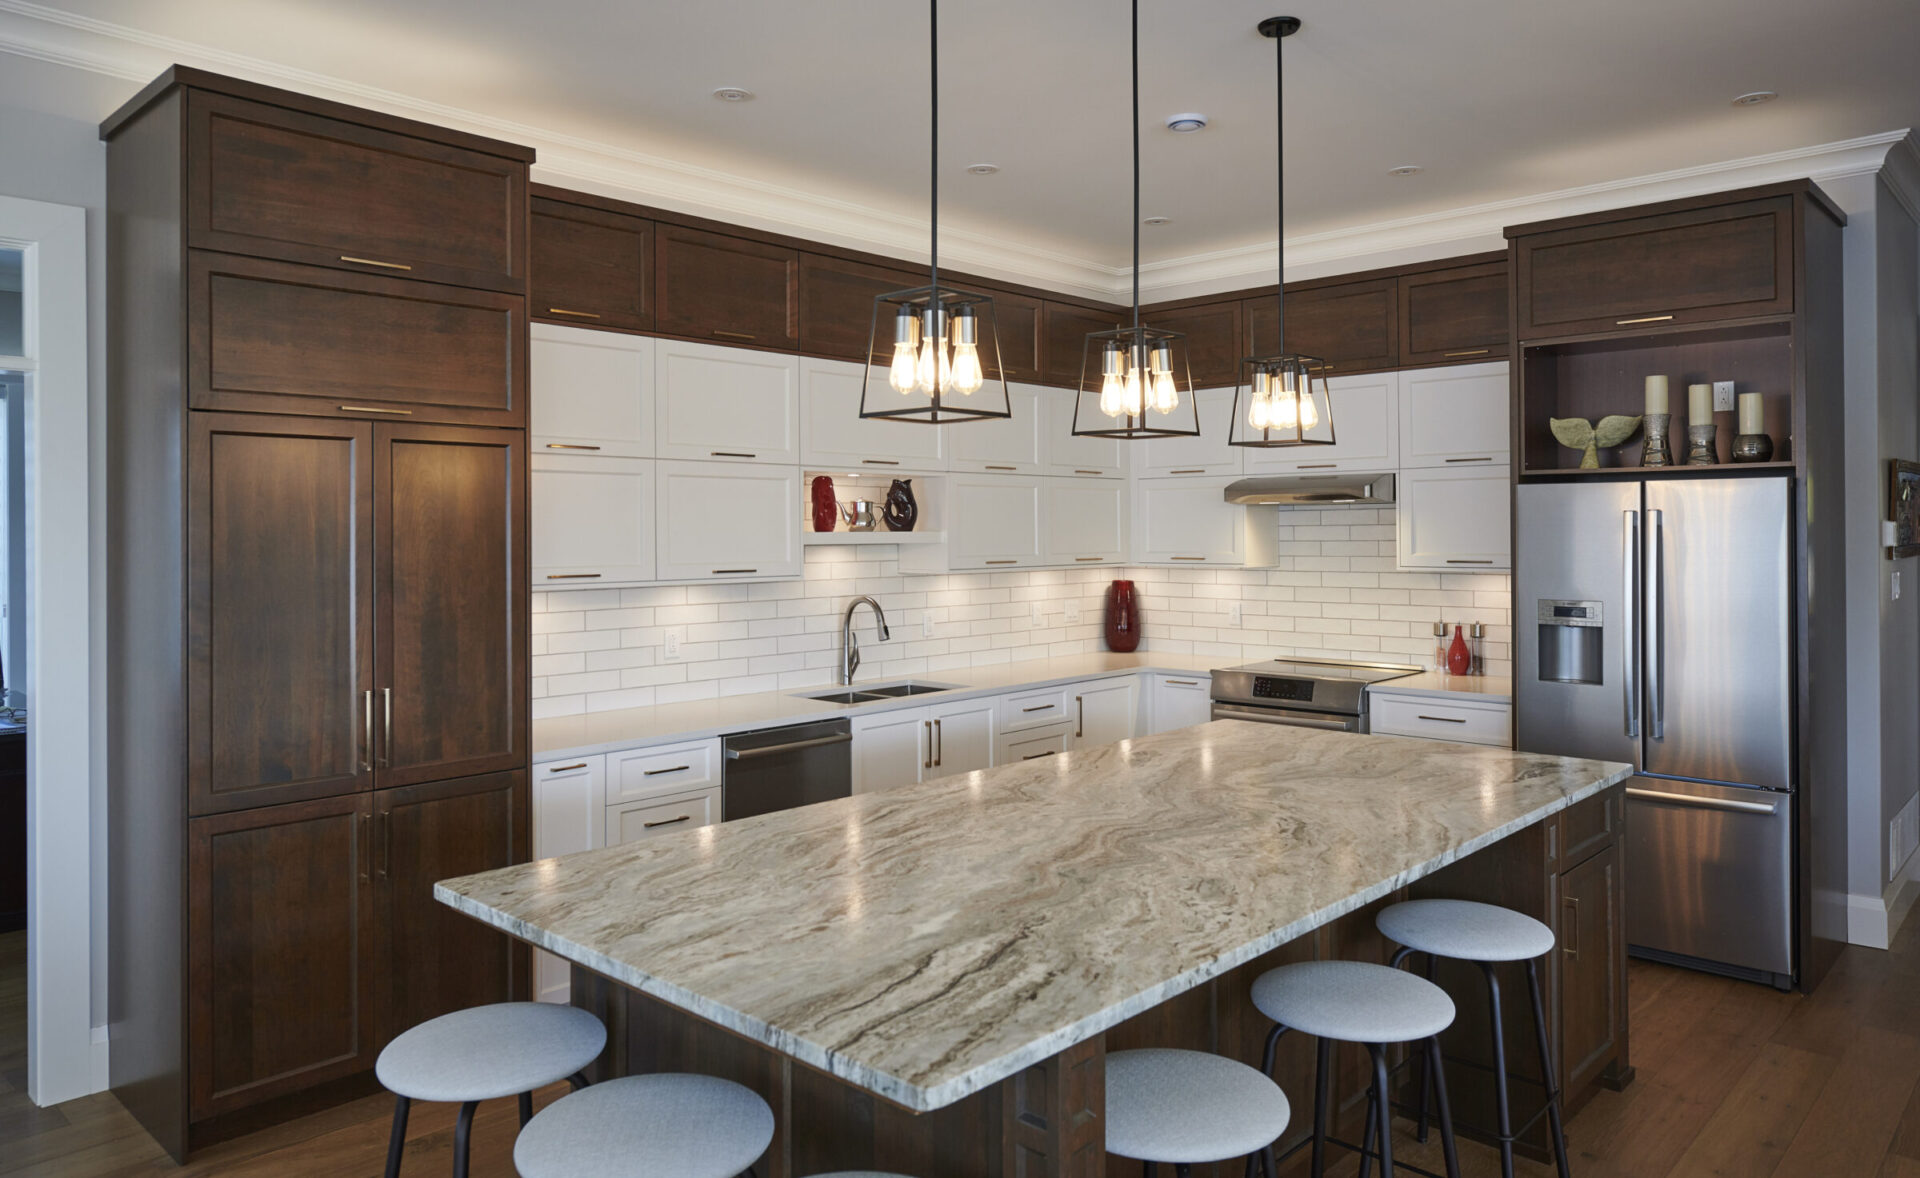 Modern kitchen featuring white cabinetry, dark wood island with marble countertop, stainless steel appliances, subway tiles, and pendant lighting. No people visible.